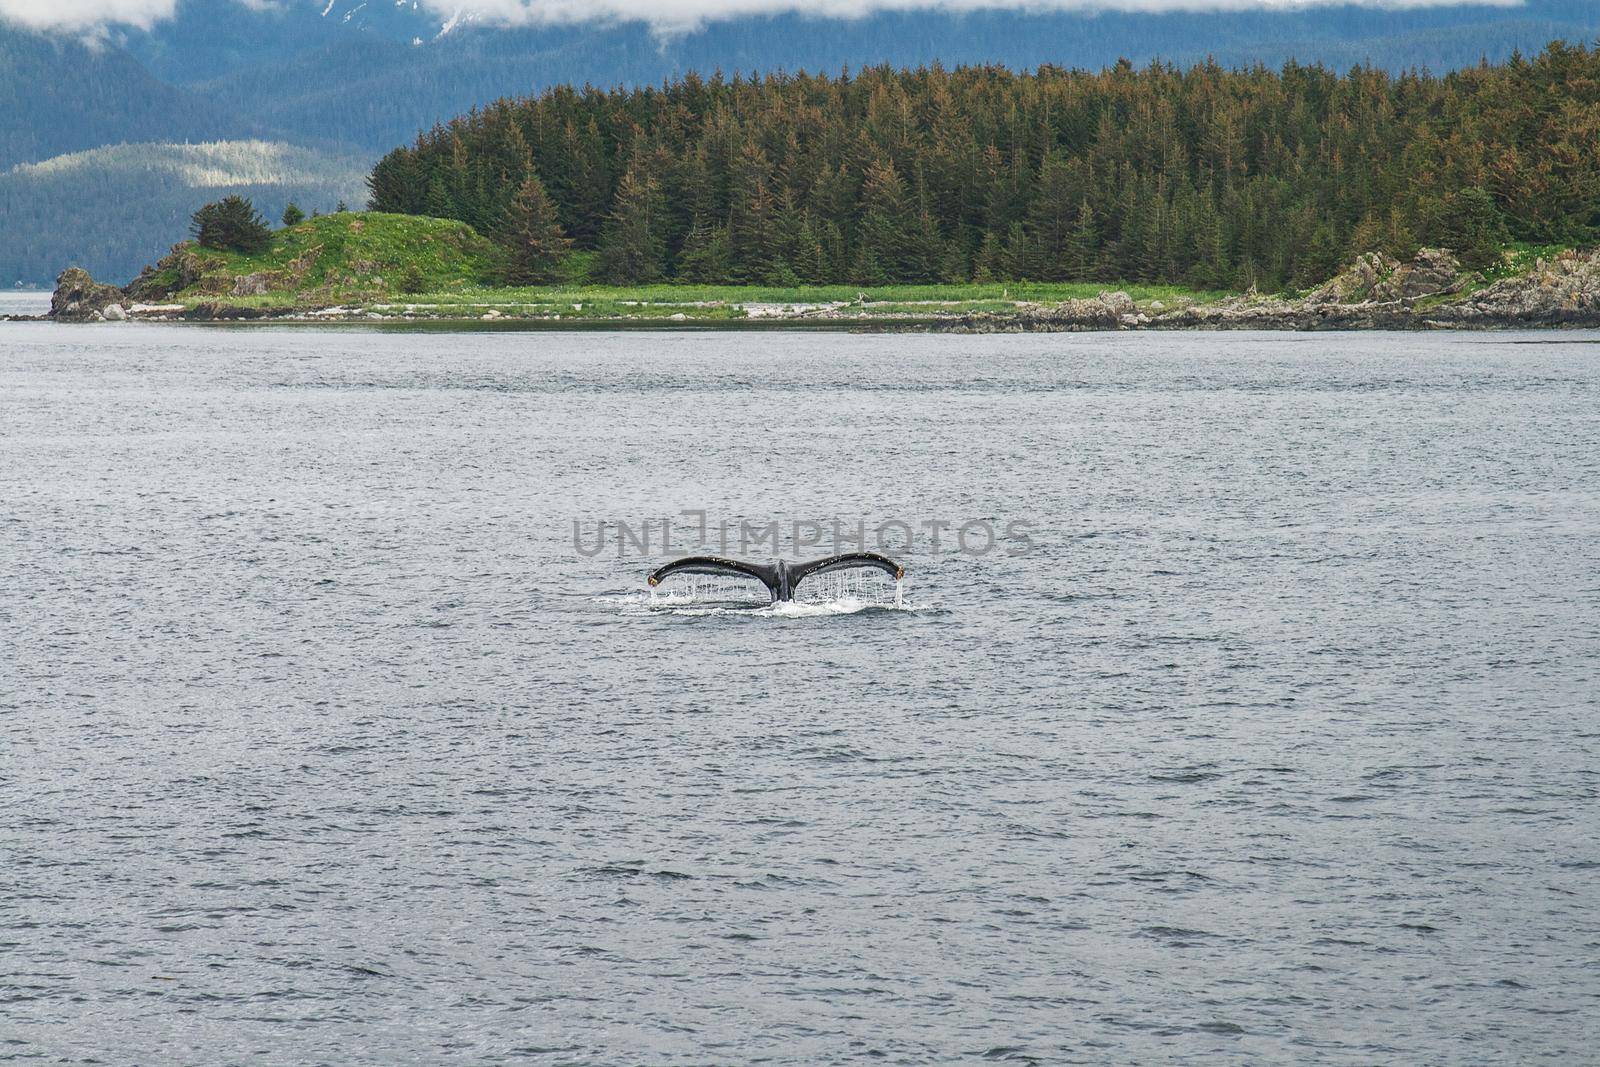 Humpback Whale Diving in front of the Trees in Alaska.